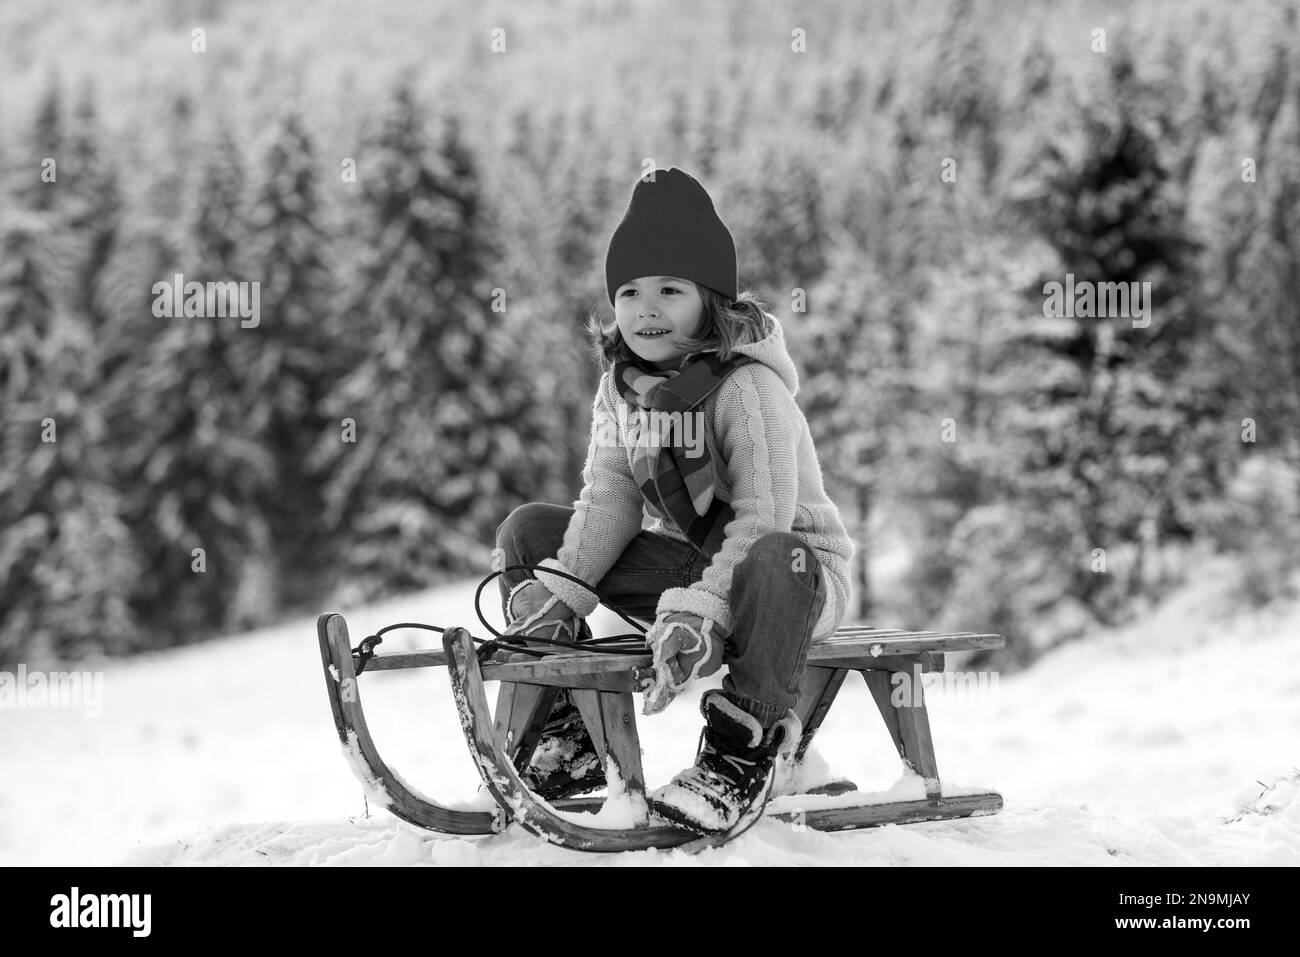 Winter child sliding on a sled in snowy park. Stock Photo